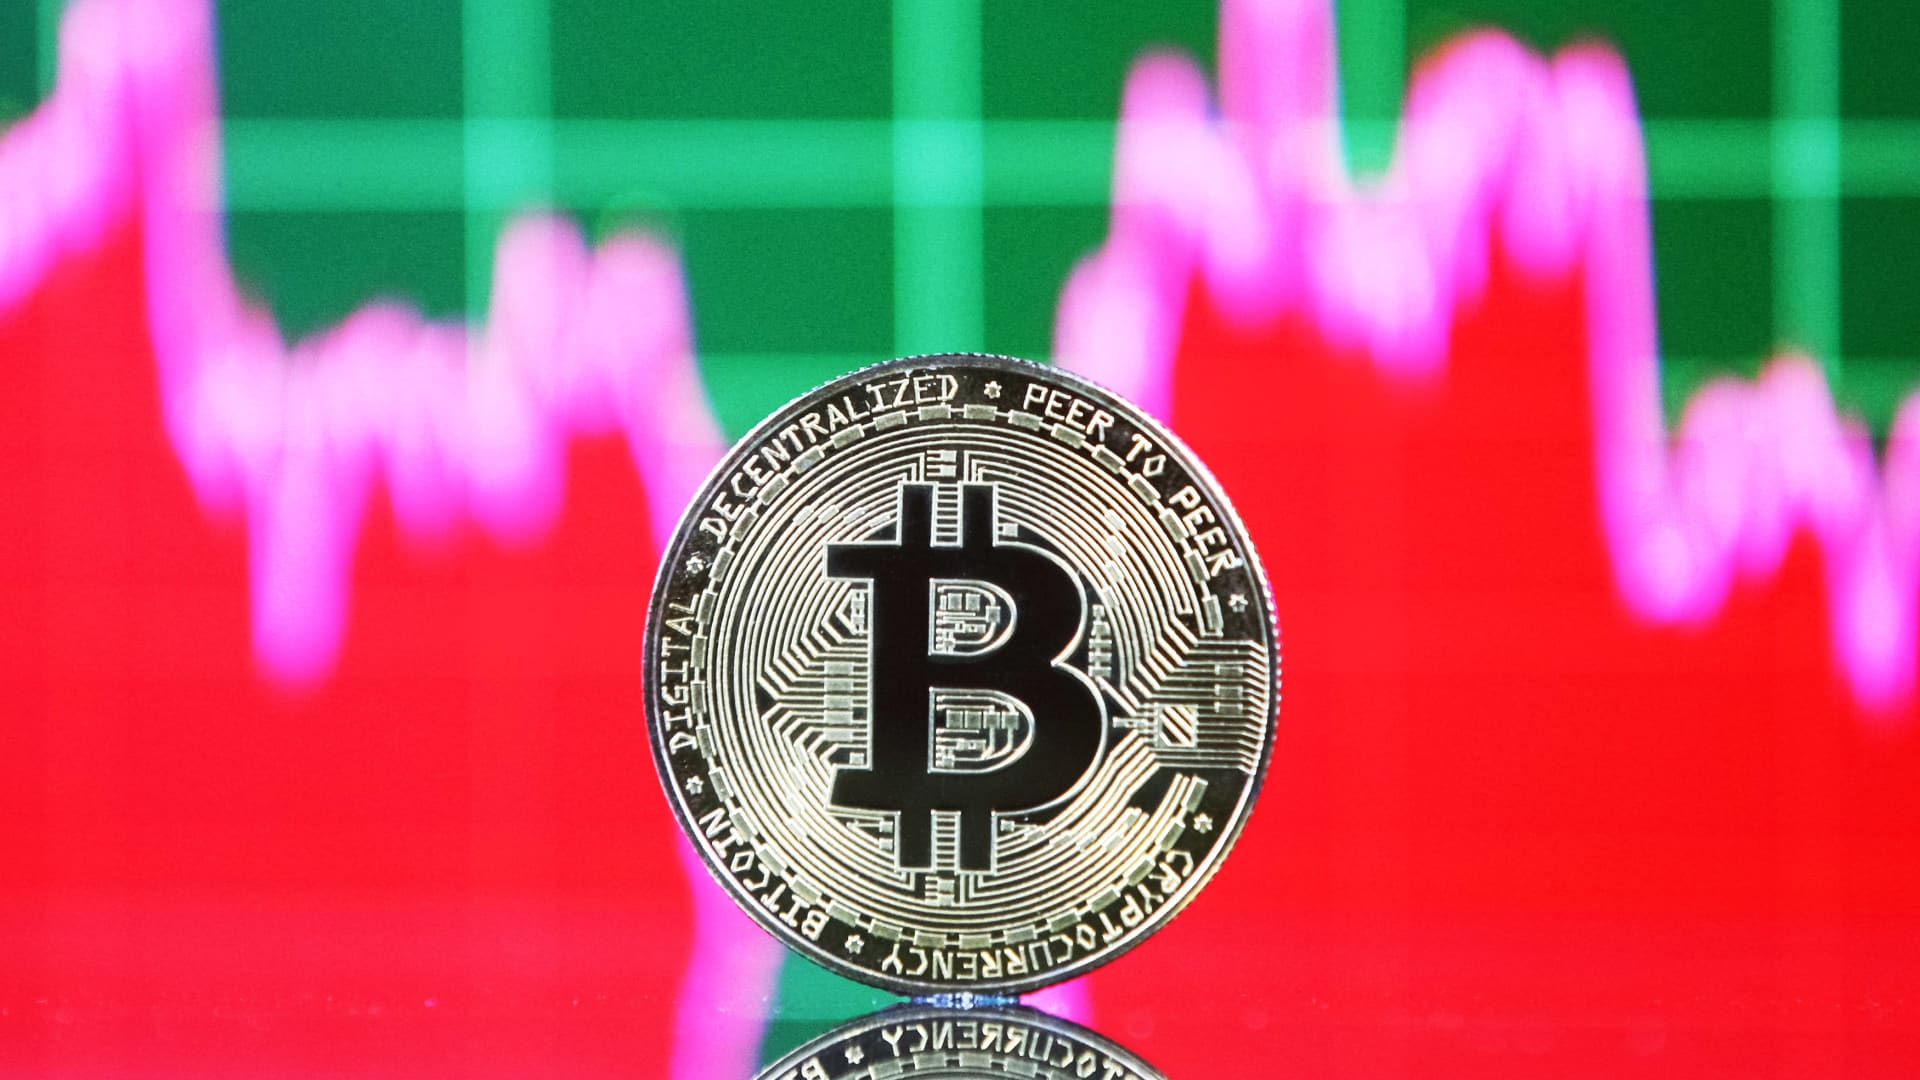 Bitcoin falls to lowest level since March as thin liquidity, regulatory pressure hits crypto markets